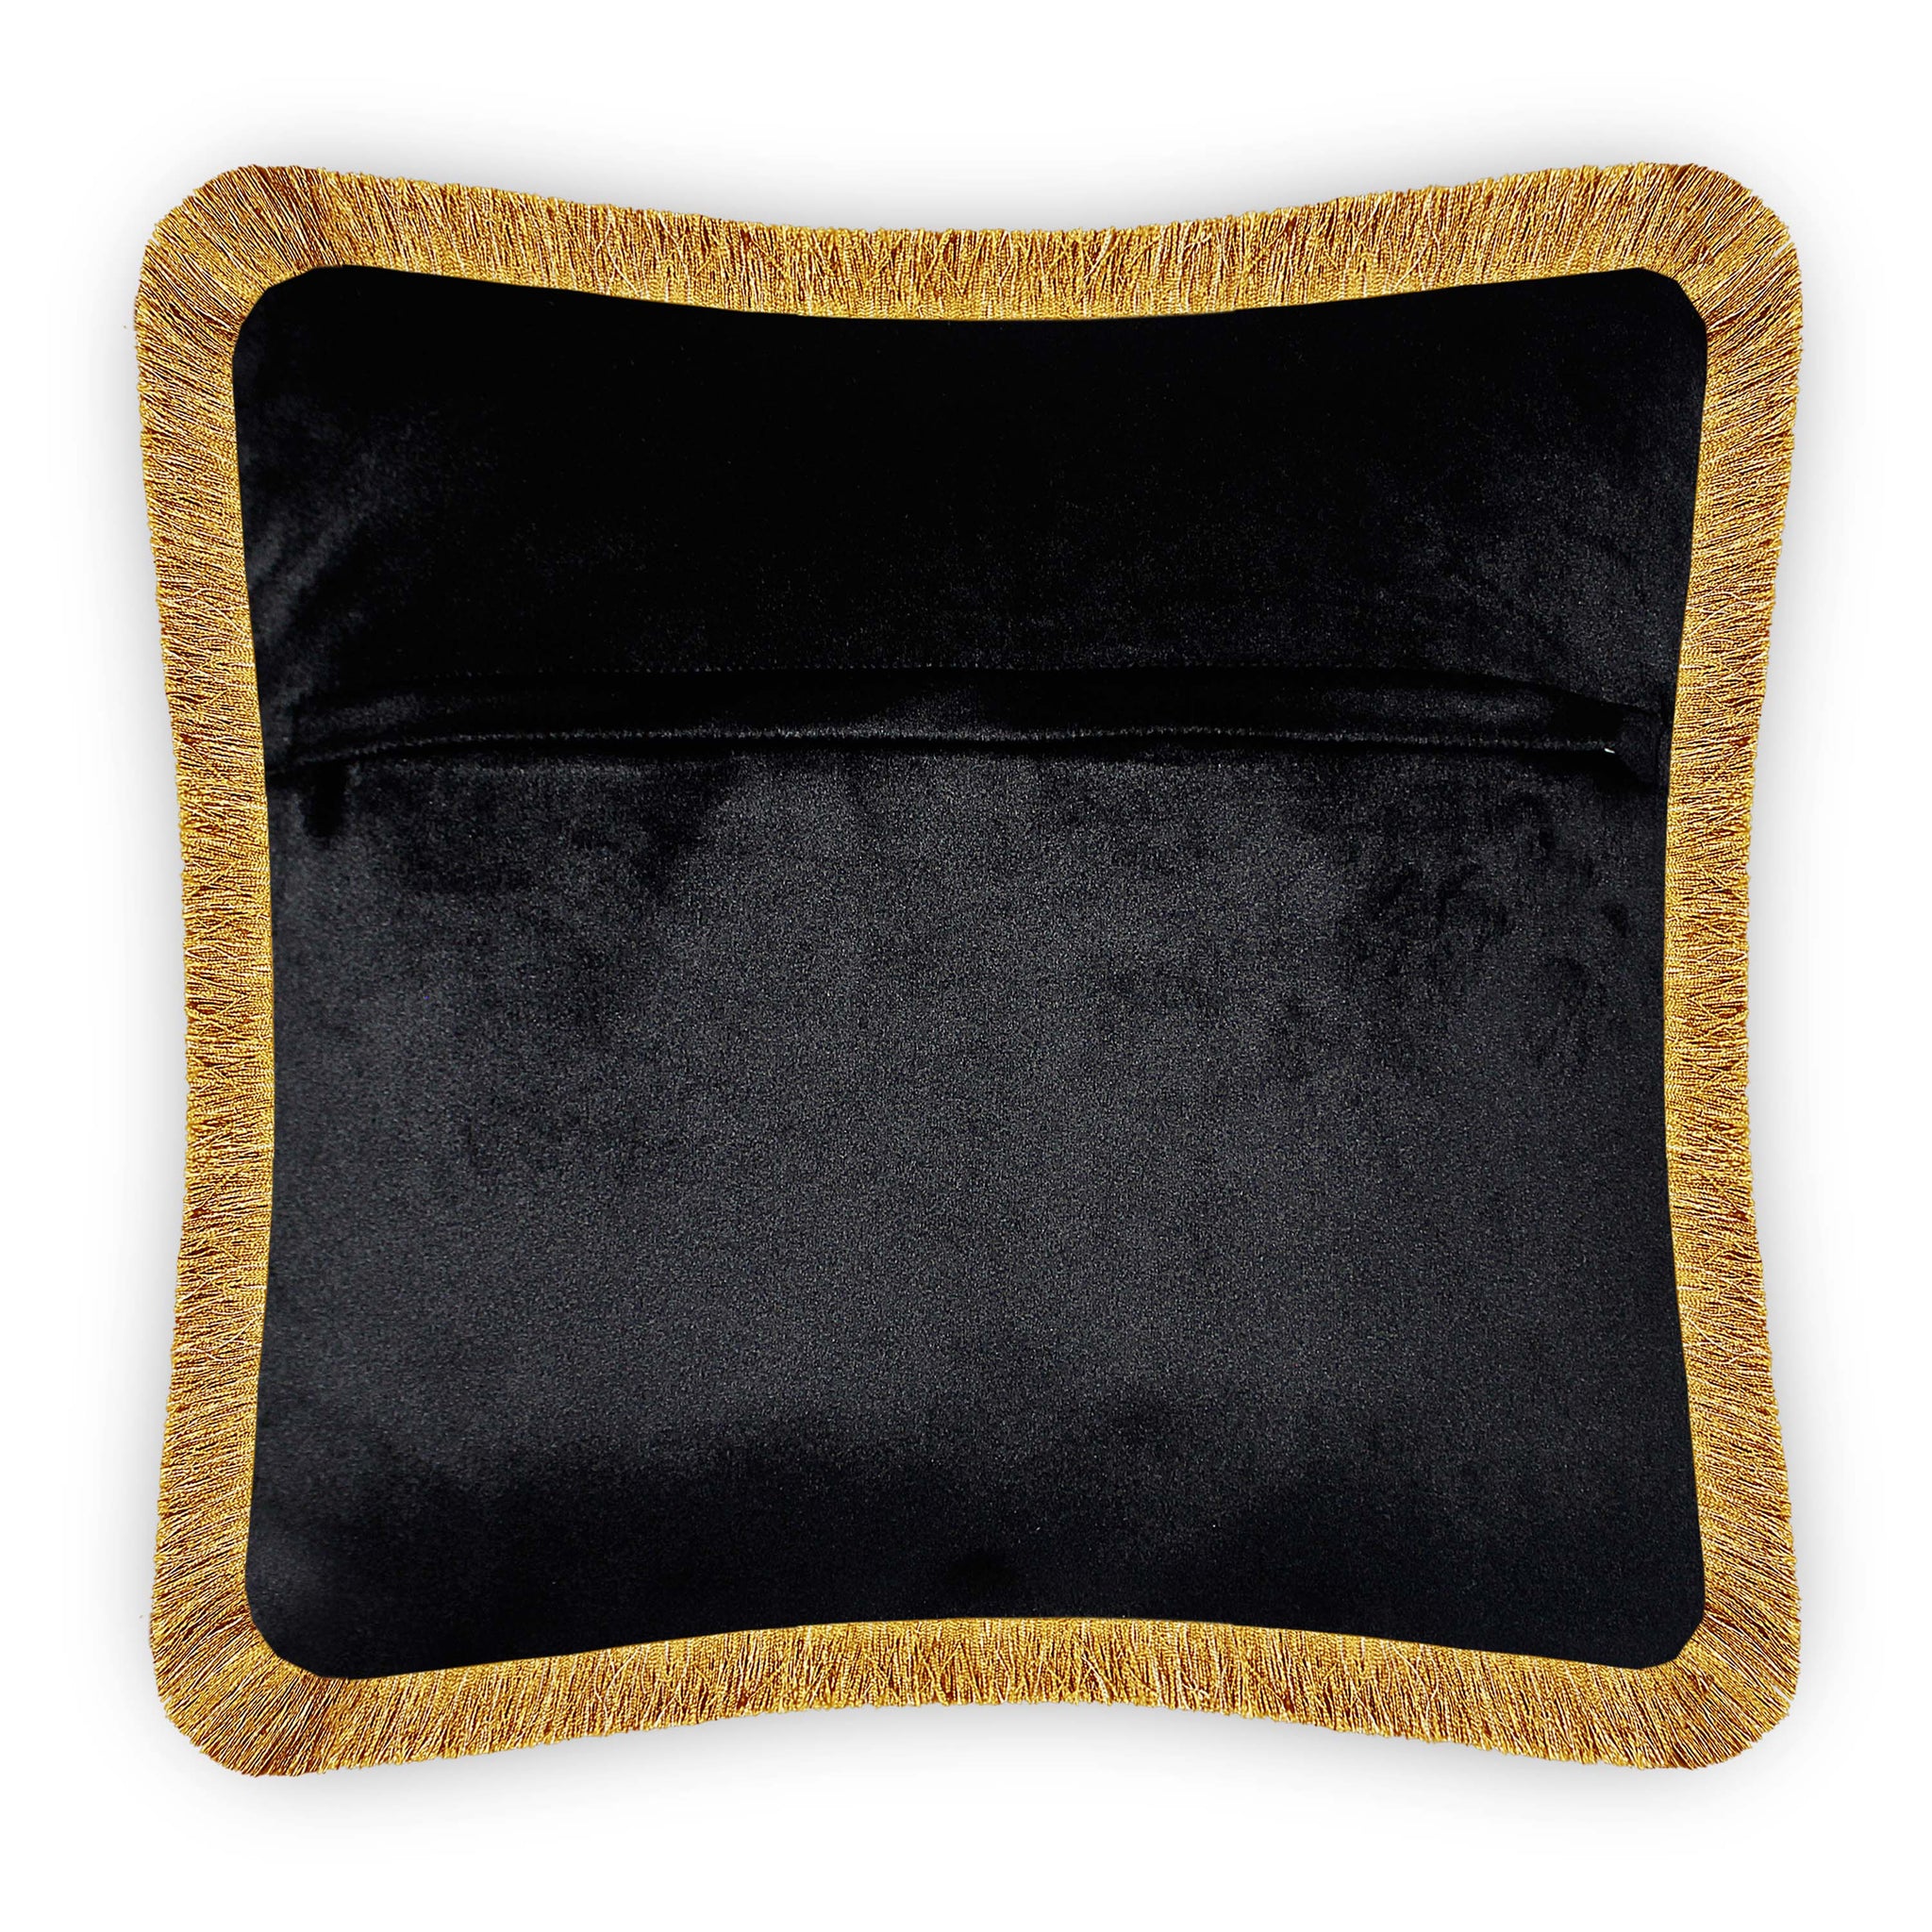 Black Velvet Cushion Cover Exotic Jungle Leaf Decorative Pillowcase Modern Home Décor Throw Pillow for Sofa Chair Couch Bedroom 45x45 cm 18x18 In